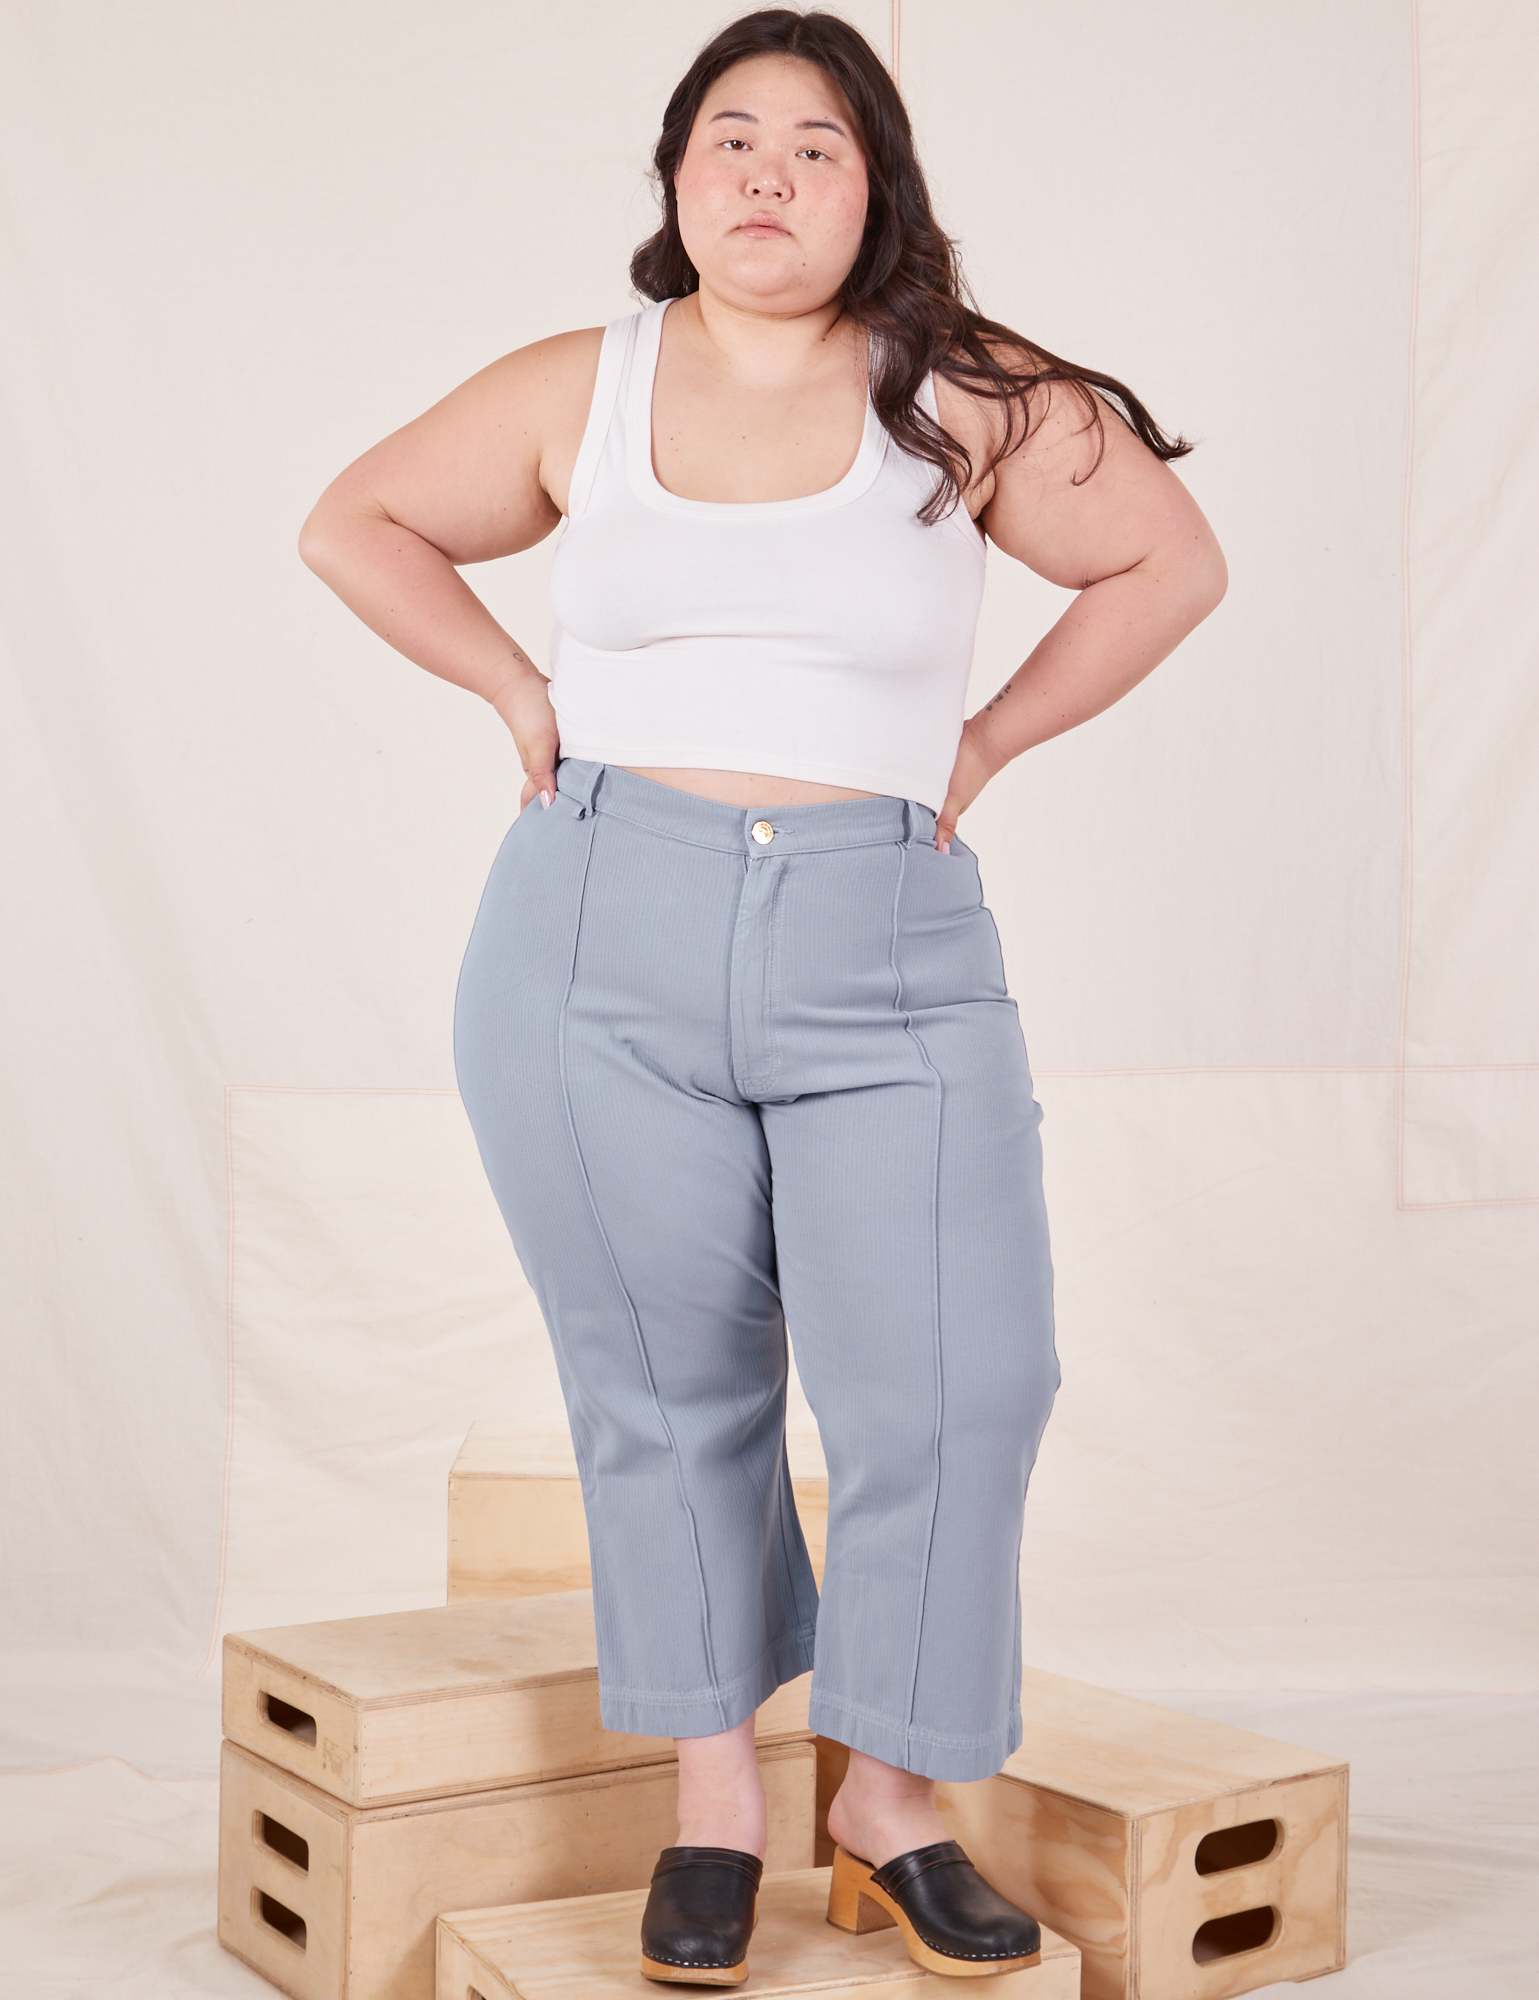 Ashley is 5&#39;7&quot; and wearing 1XL Petite Heritage Westerns in Periwinkle paired with Cropped Tank Top in vintage tee off-white